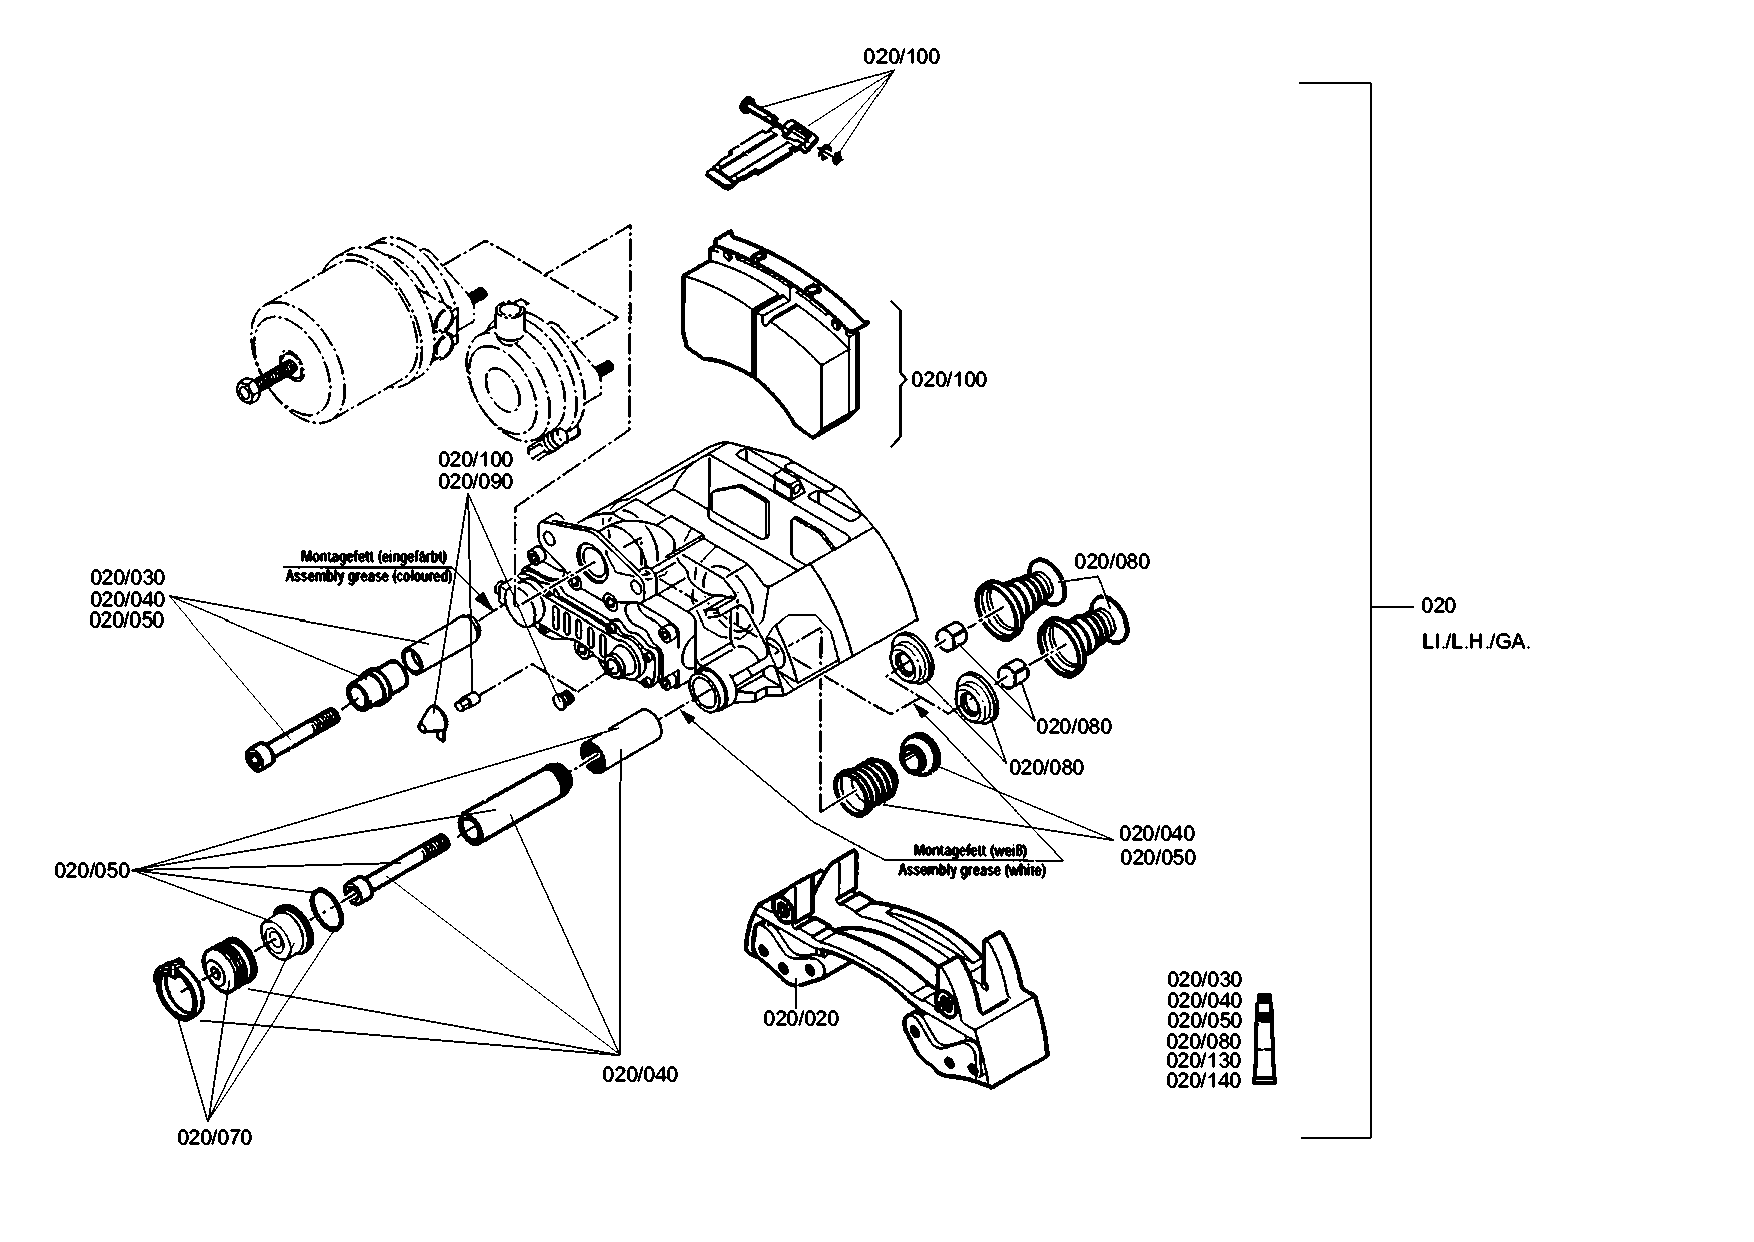 drawing for IRIZAR A 629 420 00 24 - BRAKE CYLINDER (figure 2)